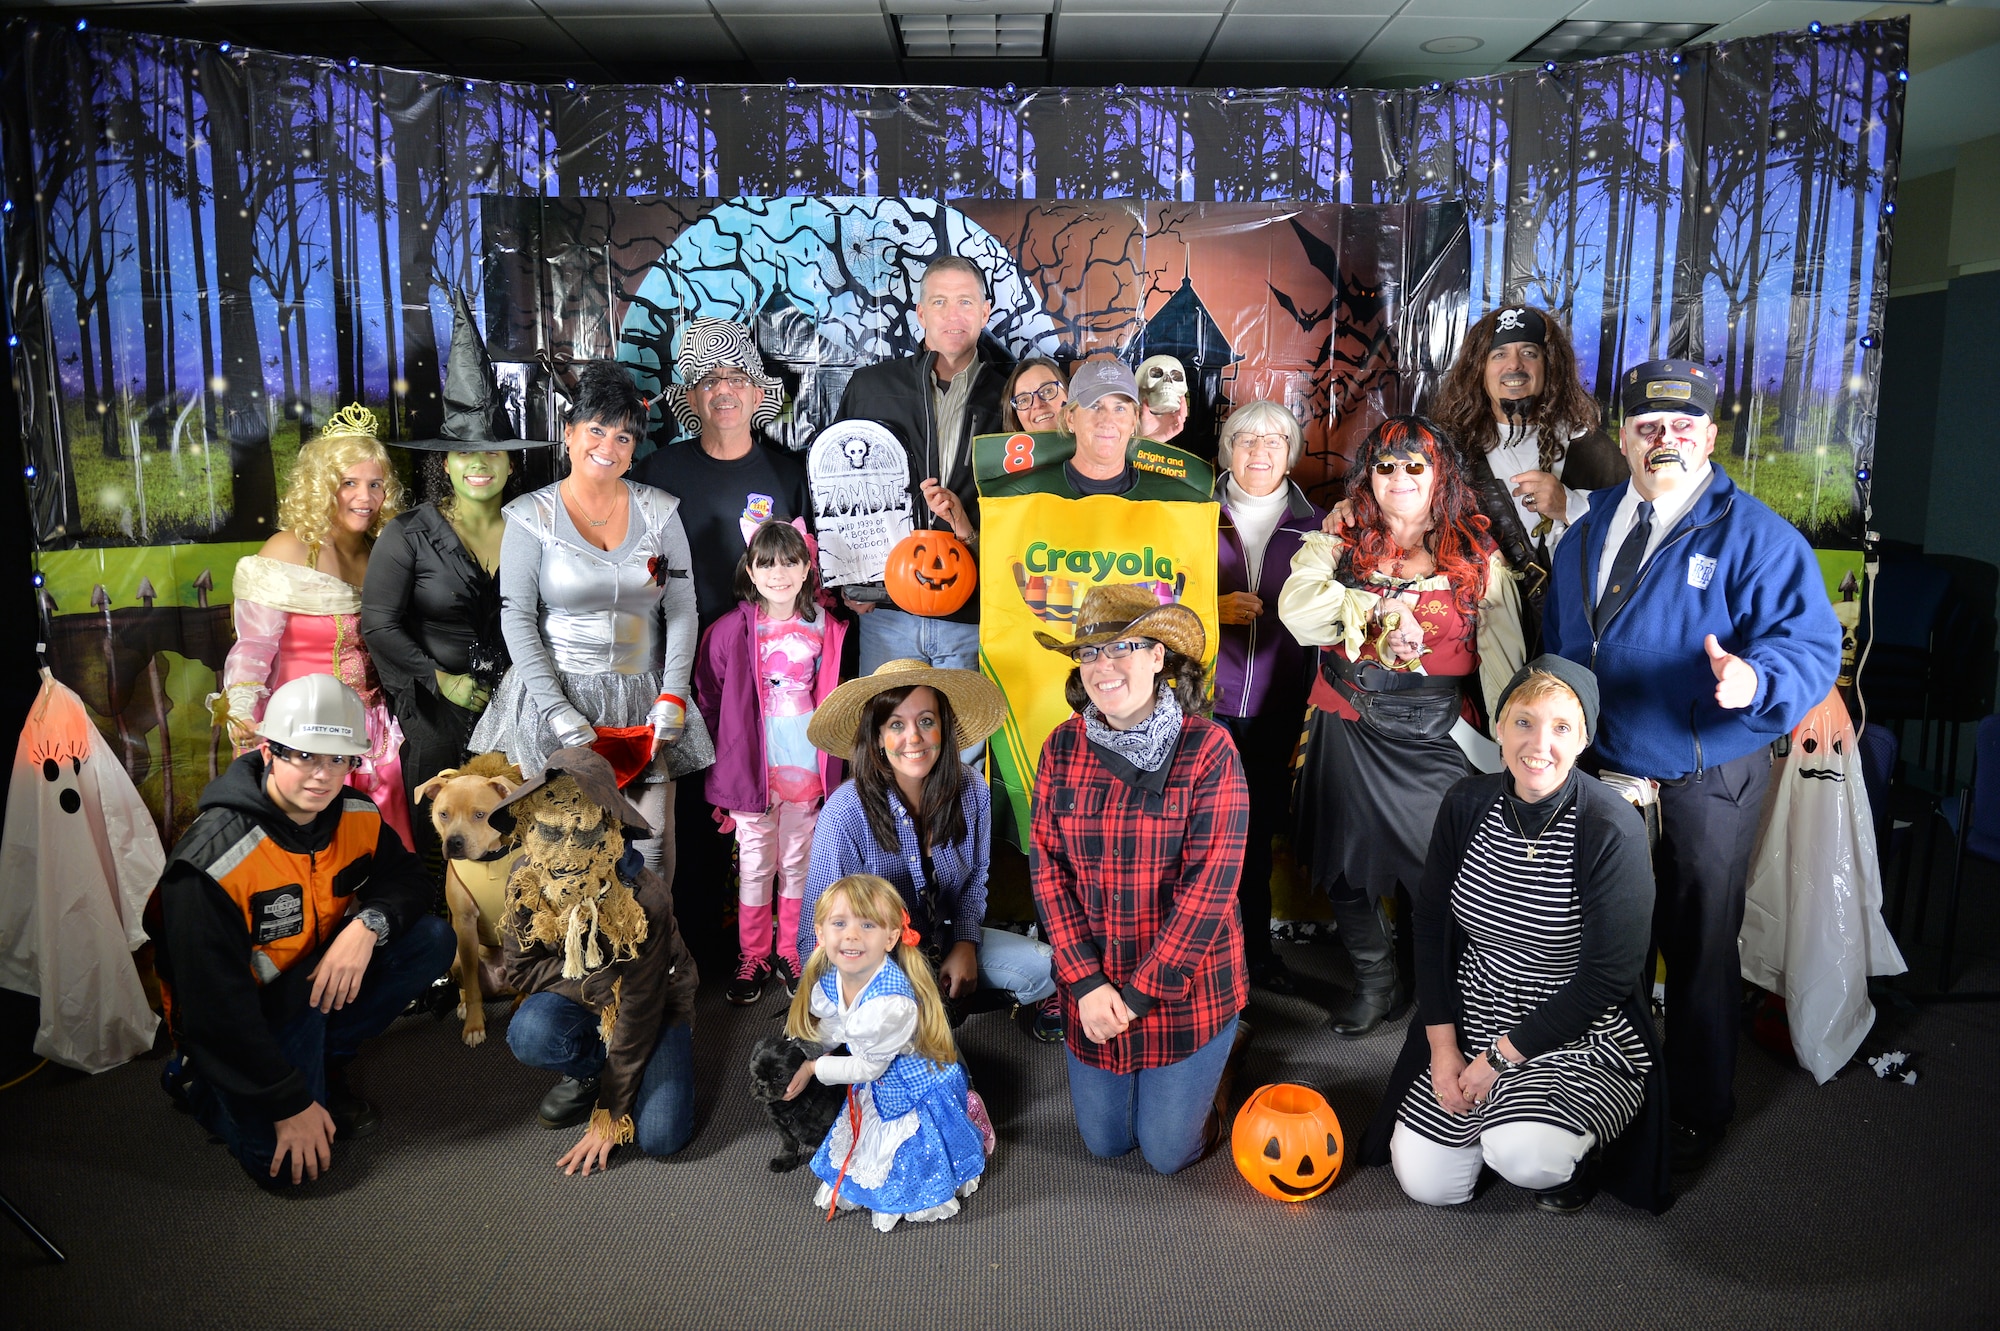 WESTHAMPTON BEACH, NY- The 106th Rescue Wing Family Readiness Group volunteers gather for a picture at the bases first annual Trunk-or-Treat, October 24th, 2015.
 
106th Rescue Wing members, family and friends came out in support of the base's first Halloween event coordinated by the Family Readiness Group.

(U.S. Air National Guard / Master Sgt. Cheran Cambridge / released)

